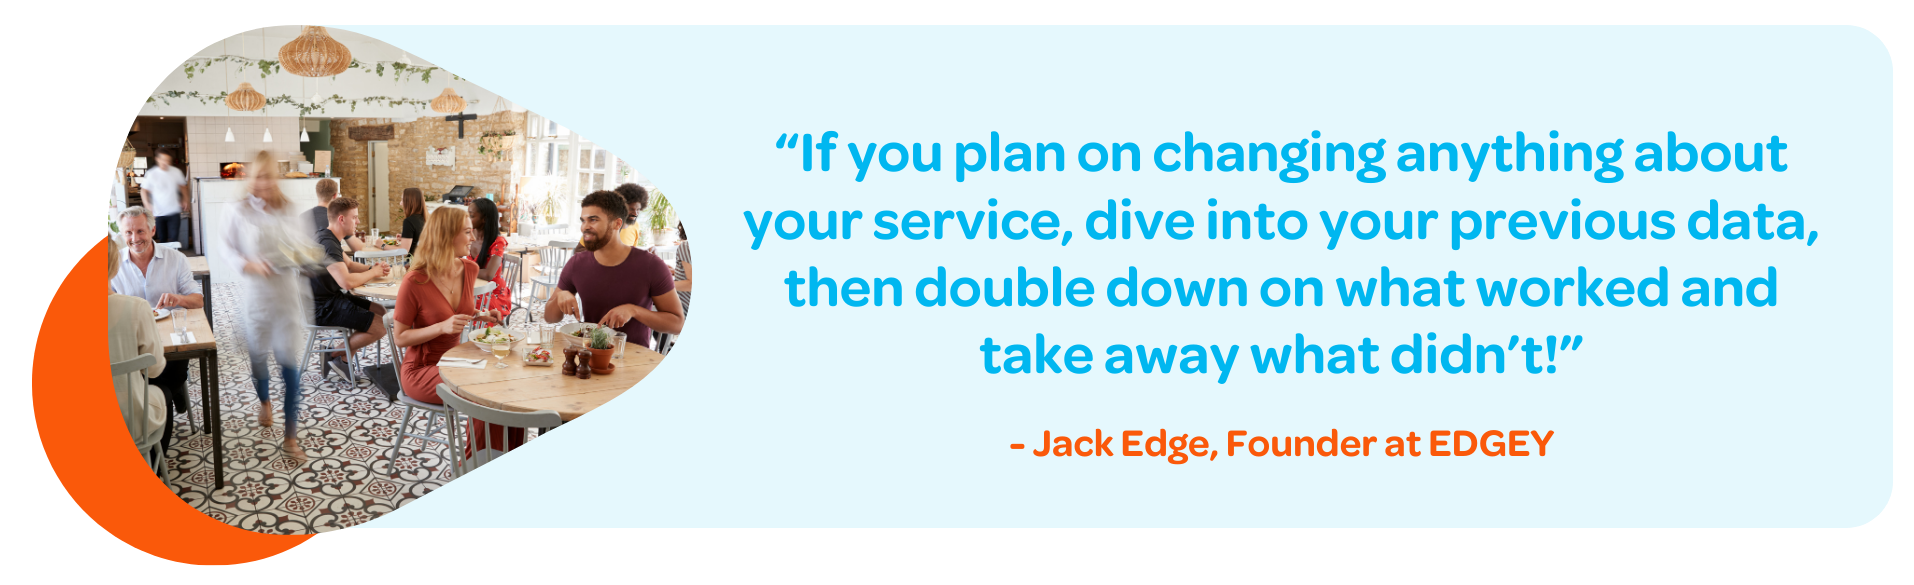 “If you plan on changing anything about your service, dive into your previous data, then double down on what worked and take away what didn’t!”